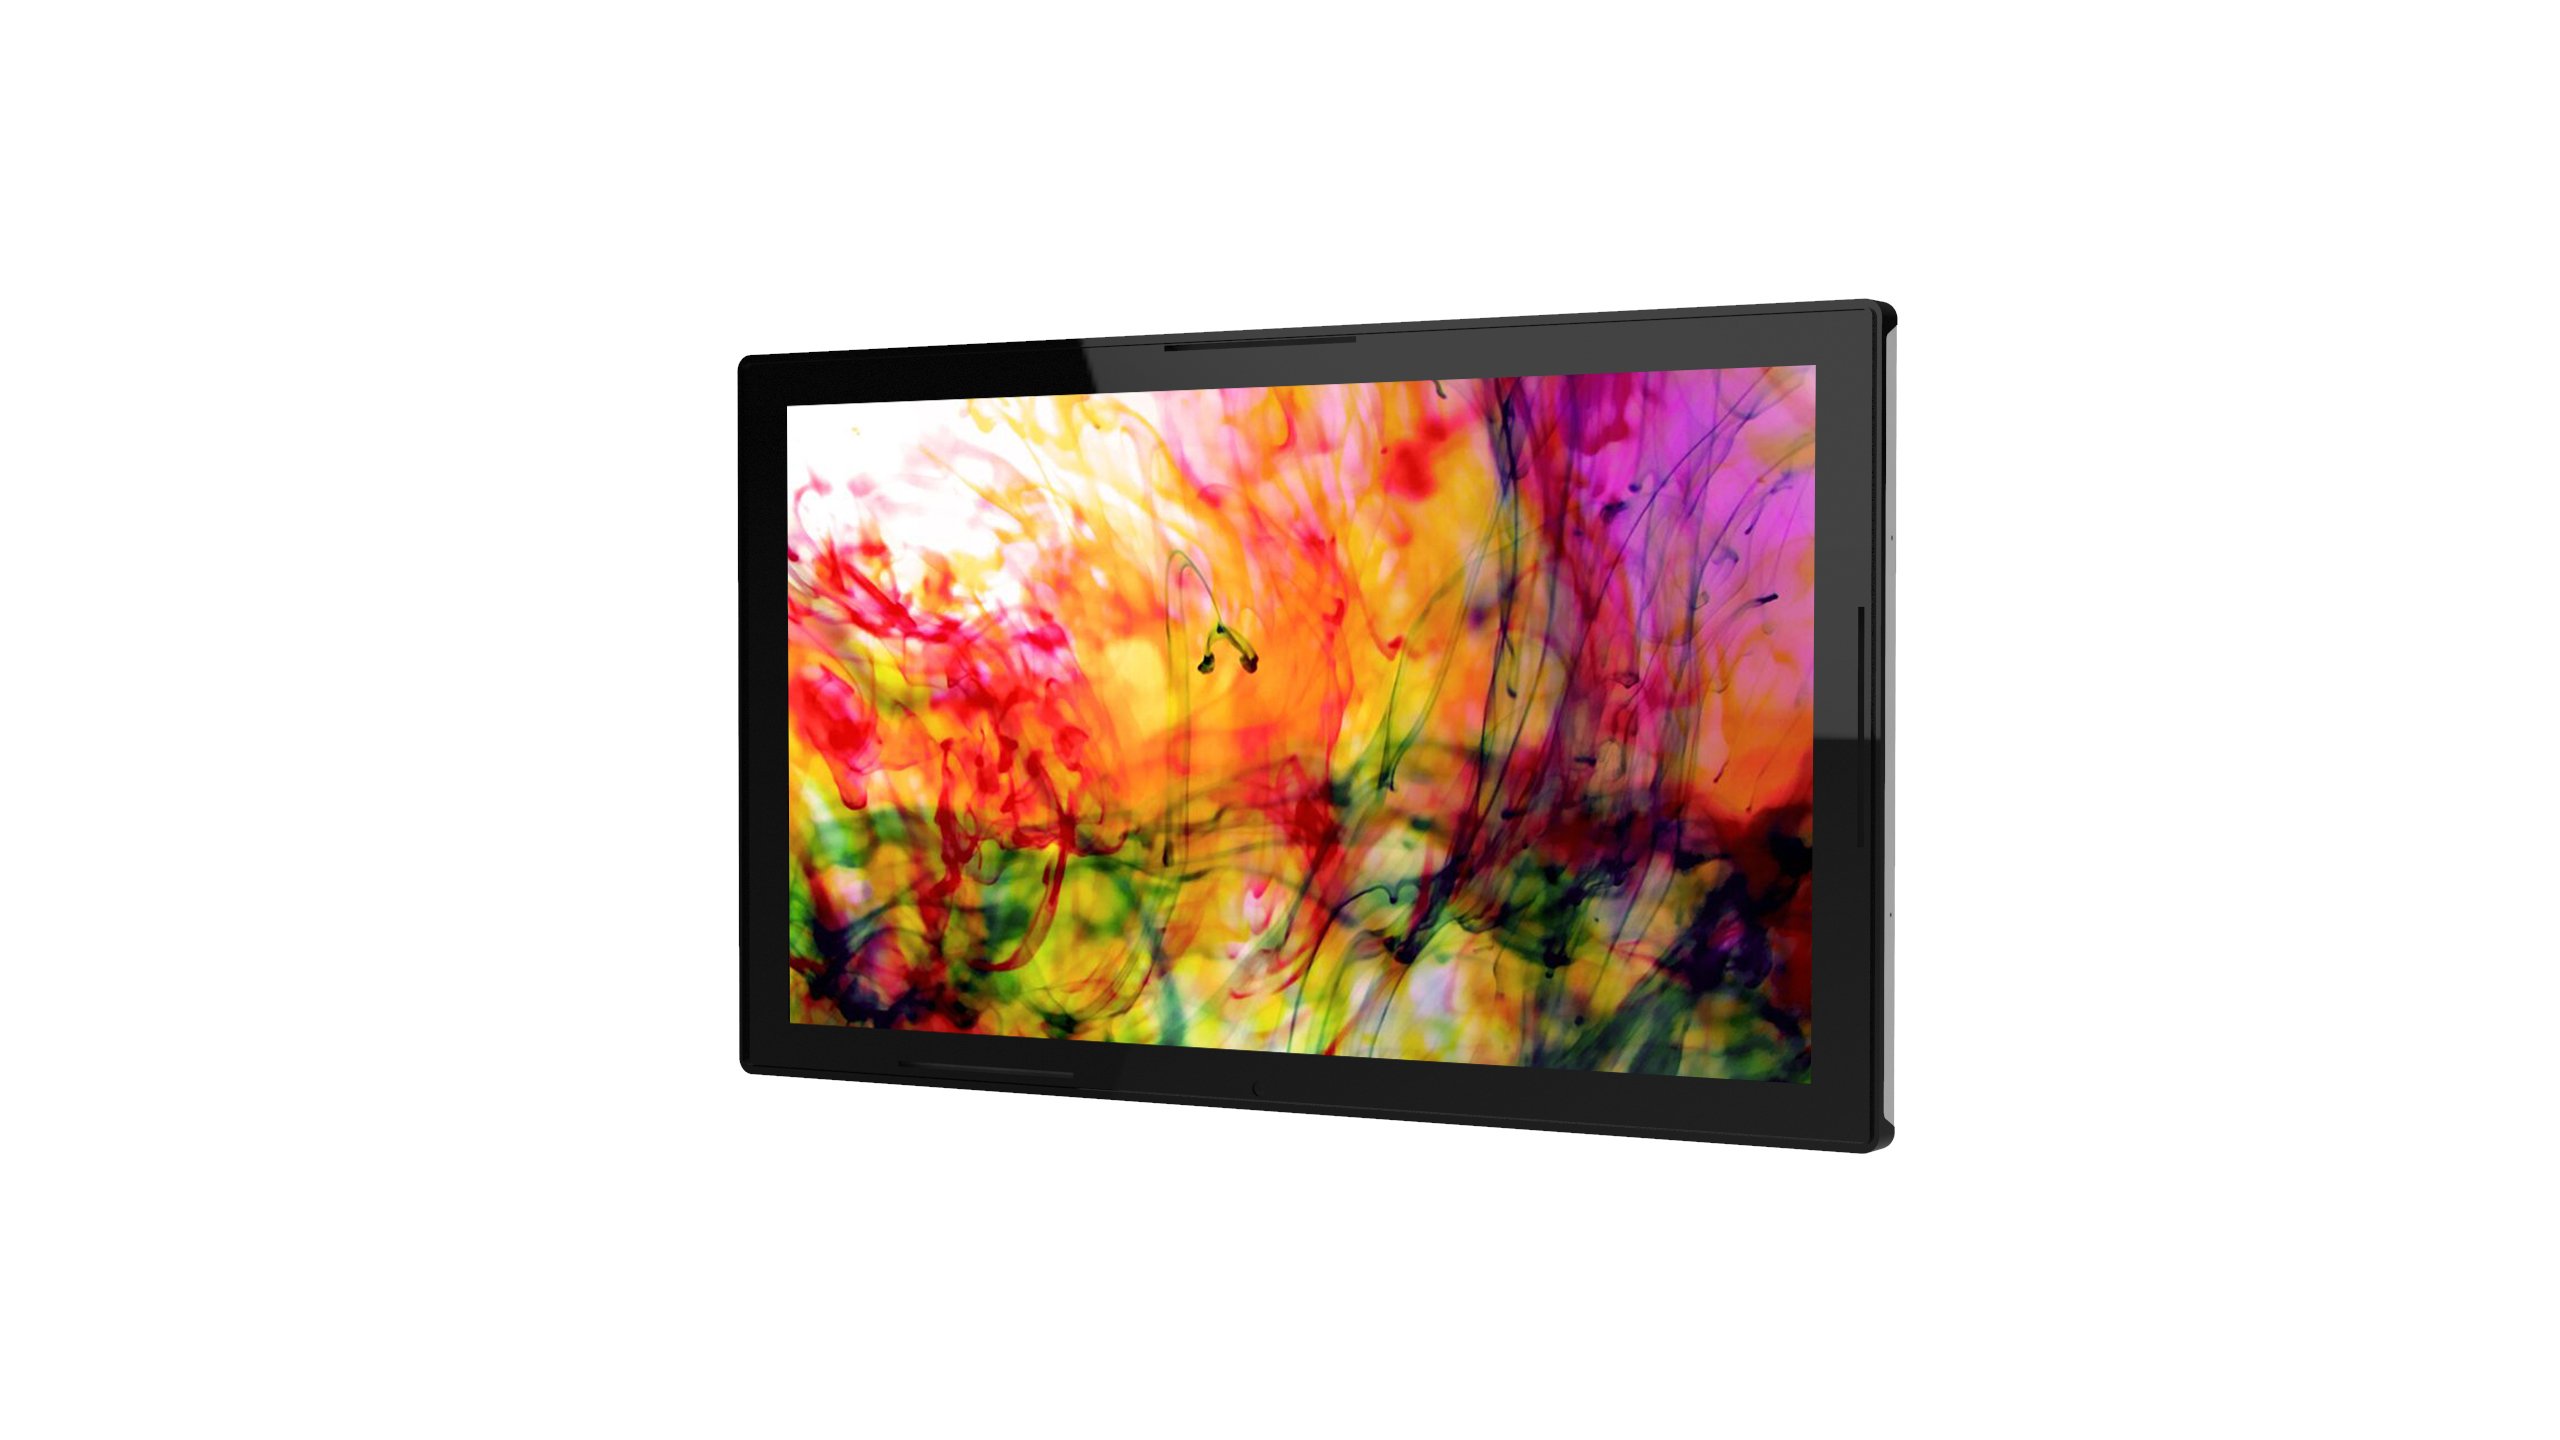 Embedded Touch Monitor Display - Starvisual display - digital signage ...